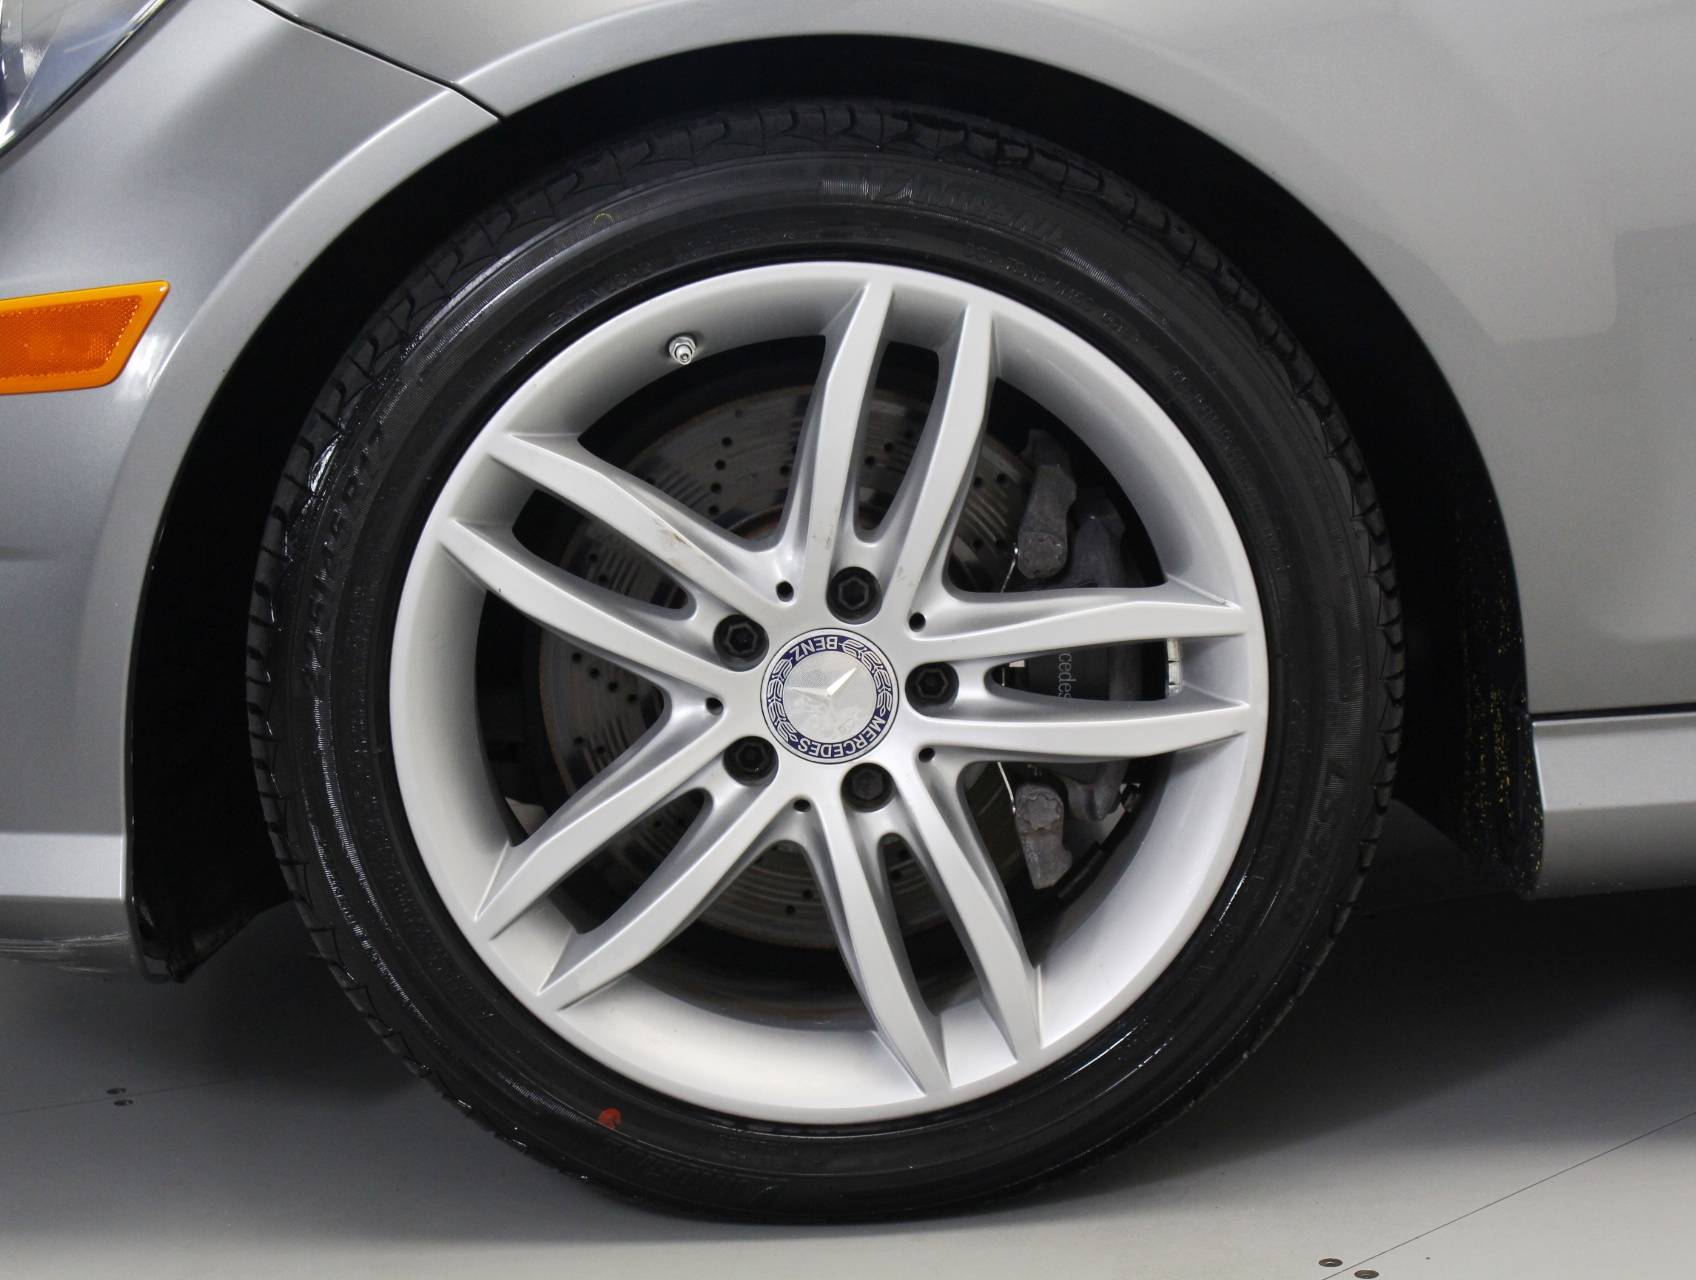 Florida Fine Cars - Used MERCEDES-BENZ C CLASS 2014 WEST PALM C300 4MATIC